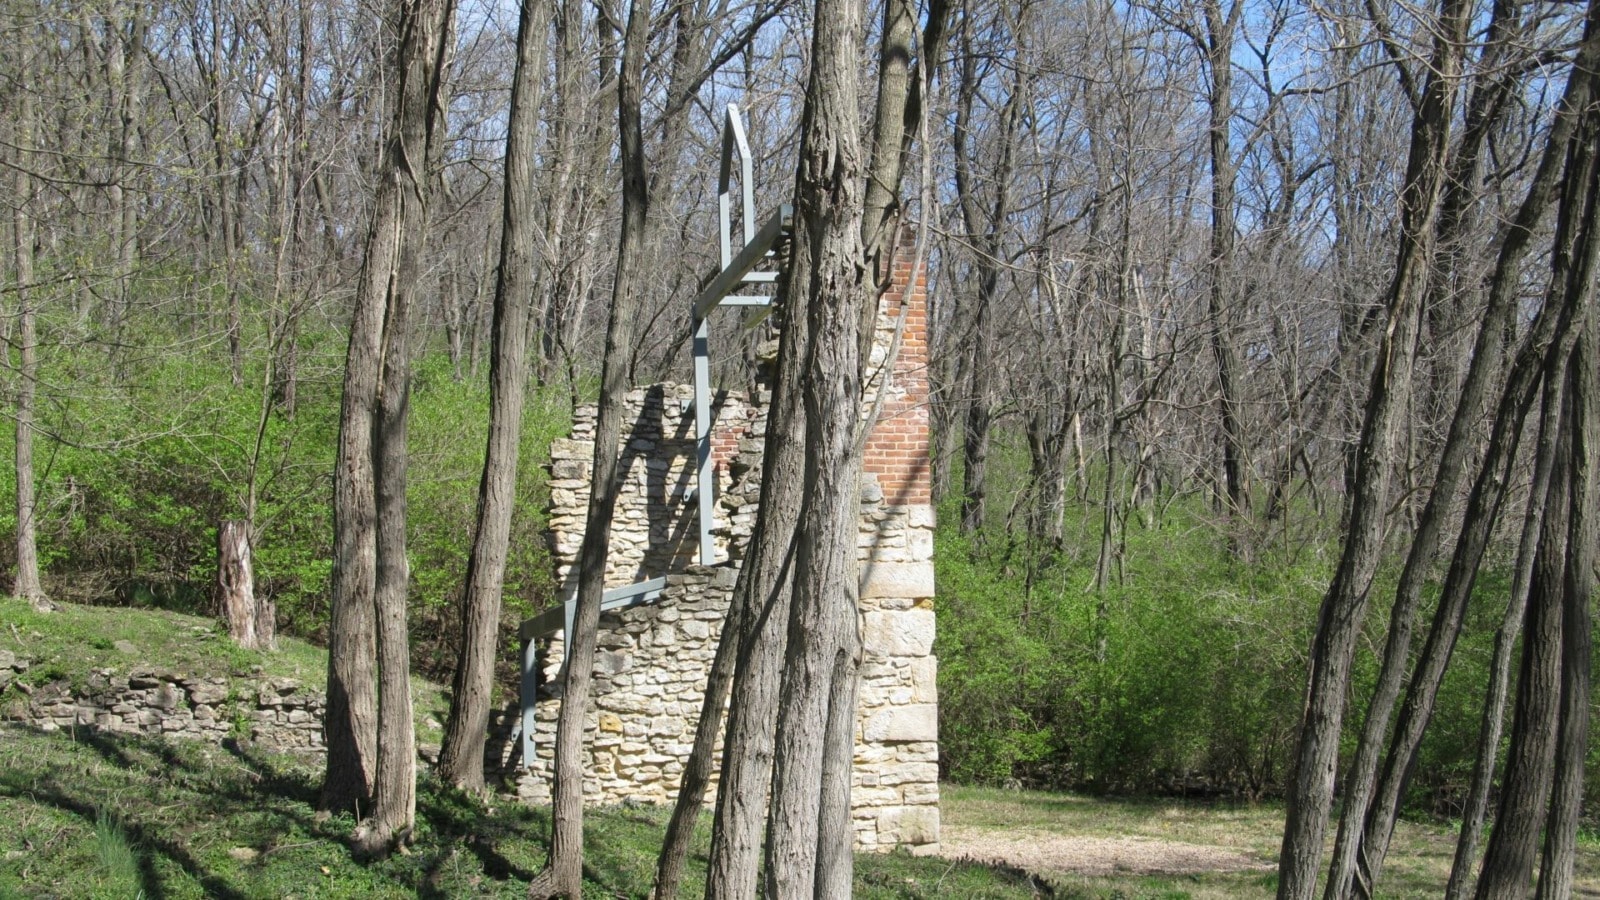 Ruins in Quindaro, which was the seed for Western University.